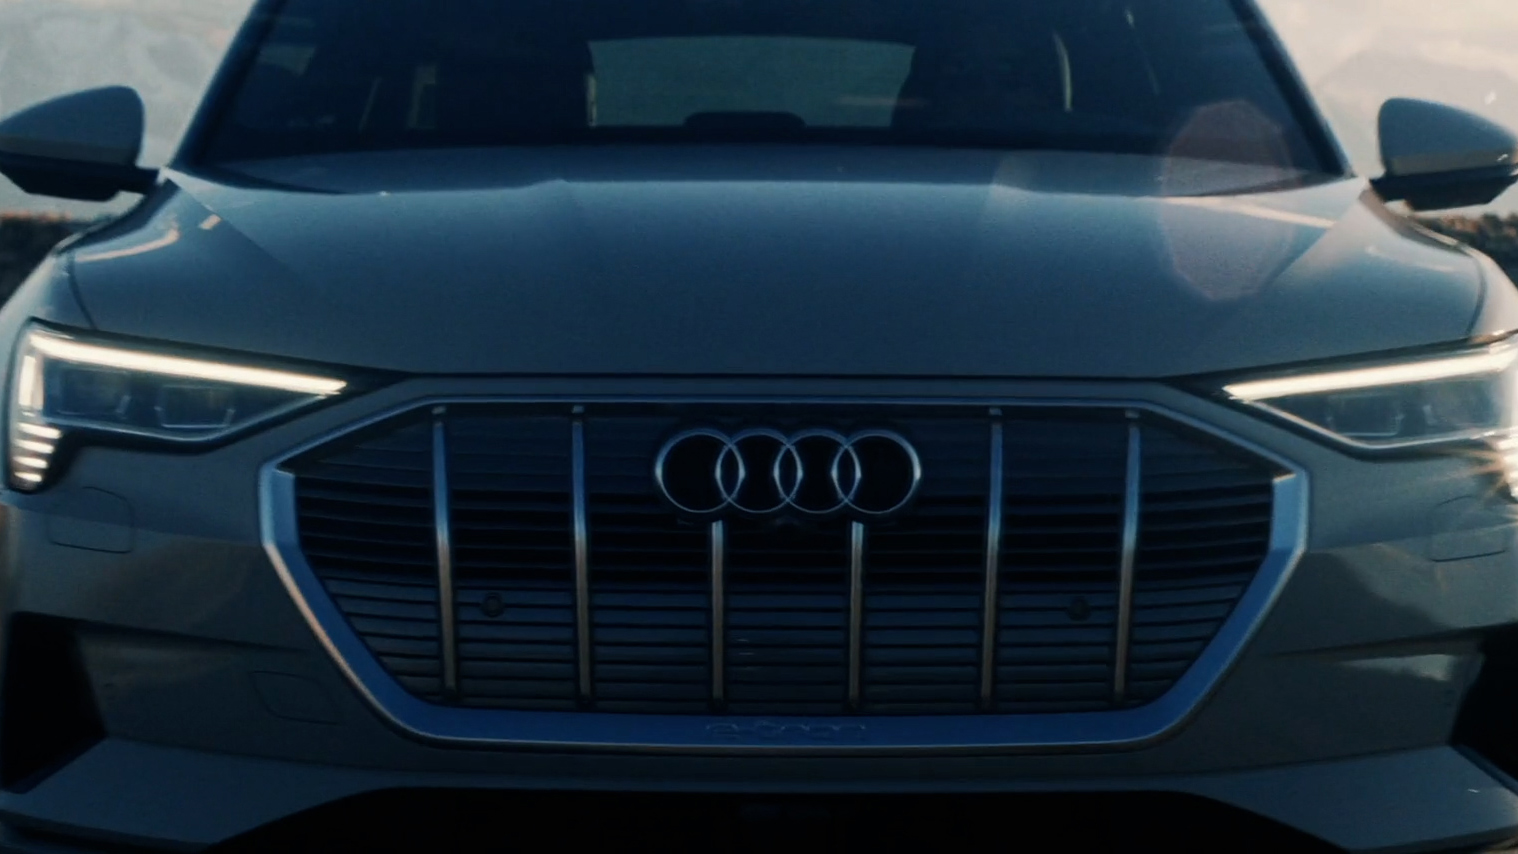 A close-up of an Audi sedan's front grille with daytime running lights on.